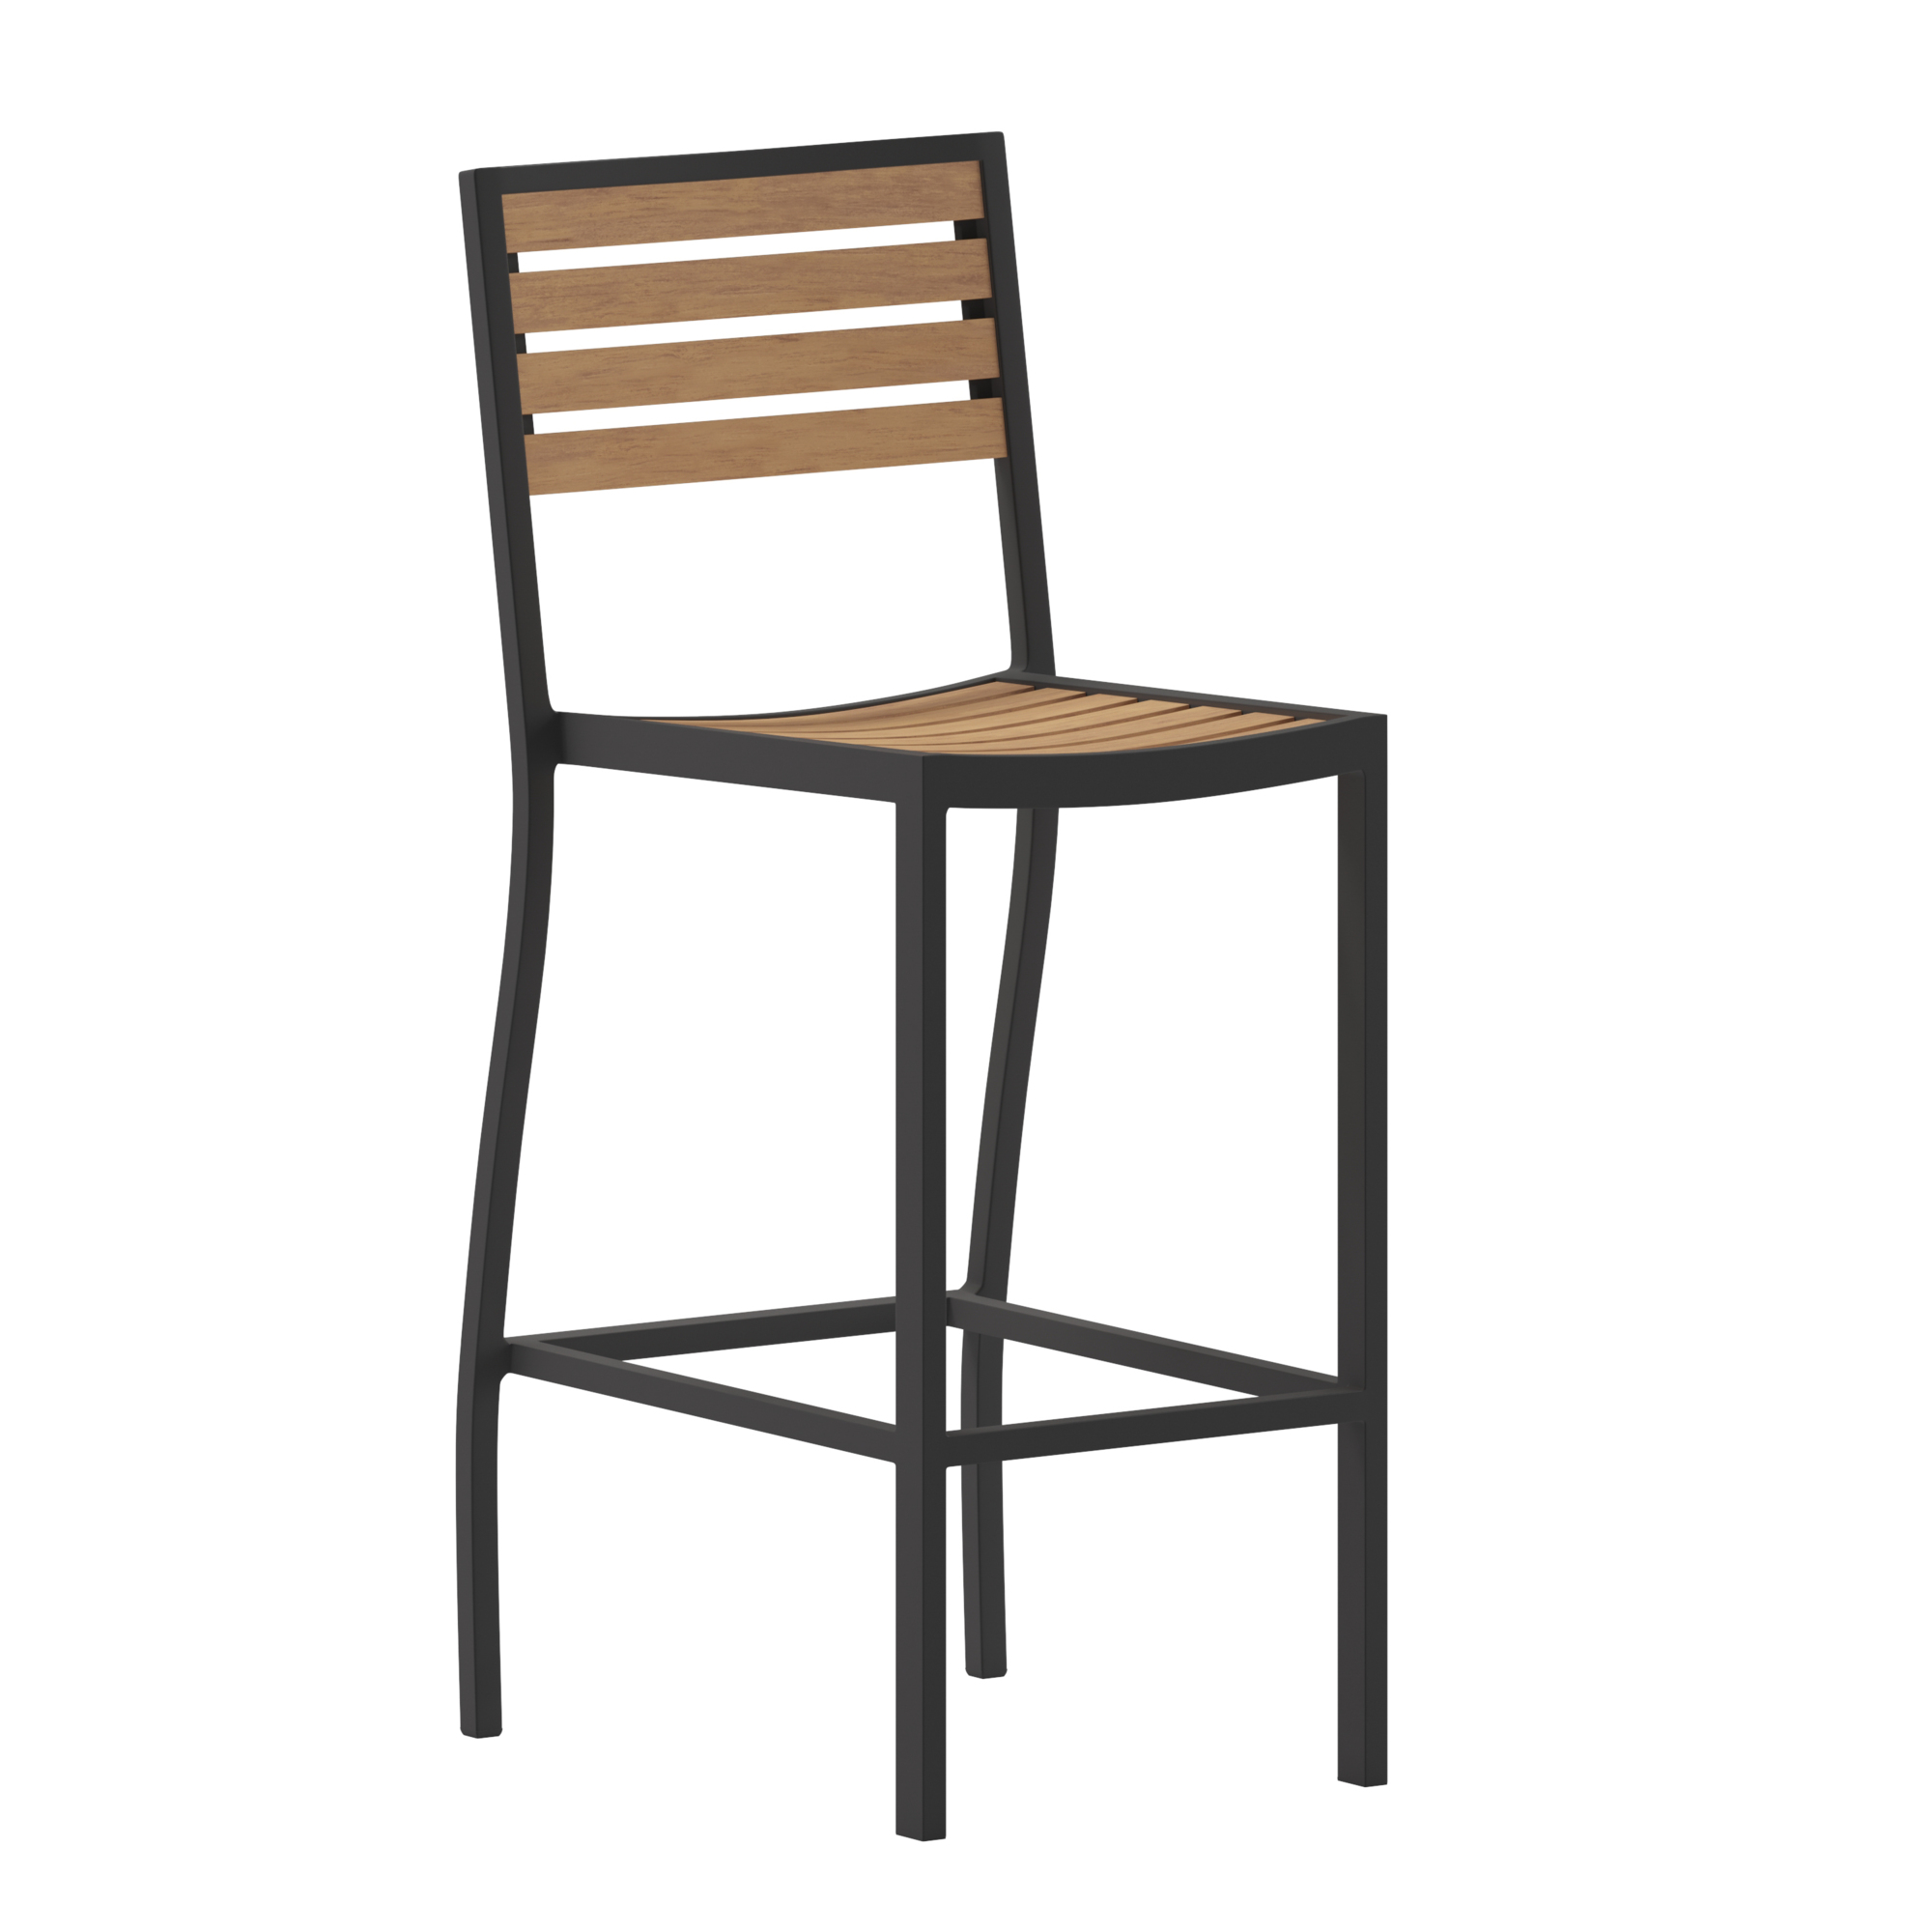 Flash Furniture, All-Weather Patio Bar Stool with Faux Teak Slats, Primary Color Brown, Material Aluminum, Width 18.25 in, Model XUDGHW6036B